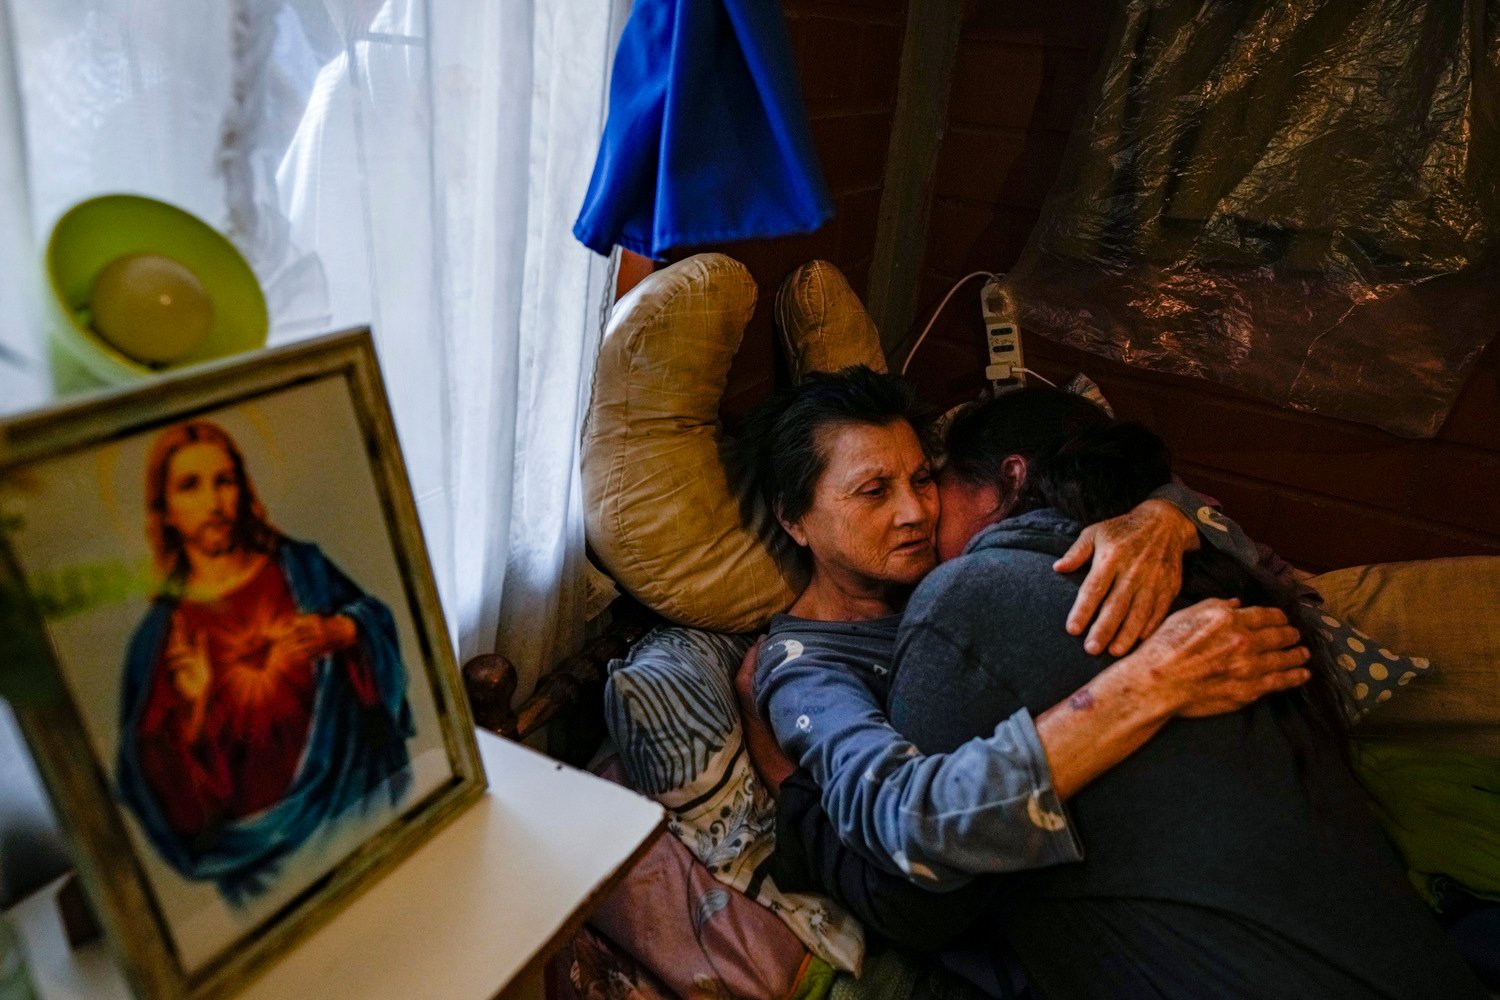  A woman embraces a relative after receiving a blessing from a priest inside her house during the Quasimodo Feast, a celebration held on the first Sunday after Easter, in Colina, Chile, April 7, 2024. The "Huasos" accompany priests to give communion 